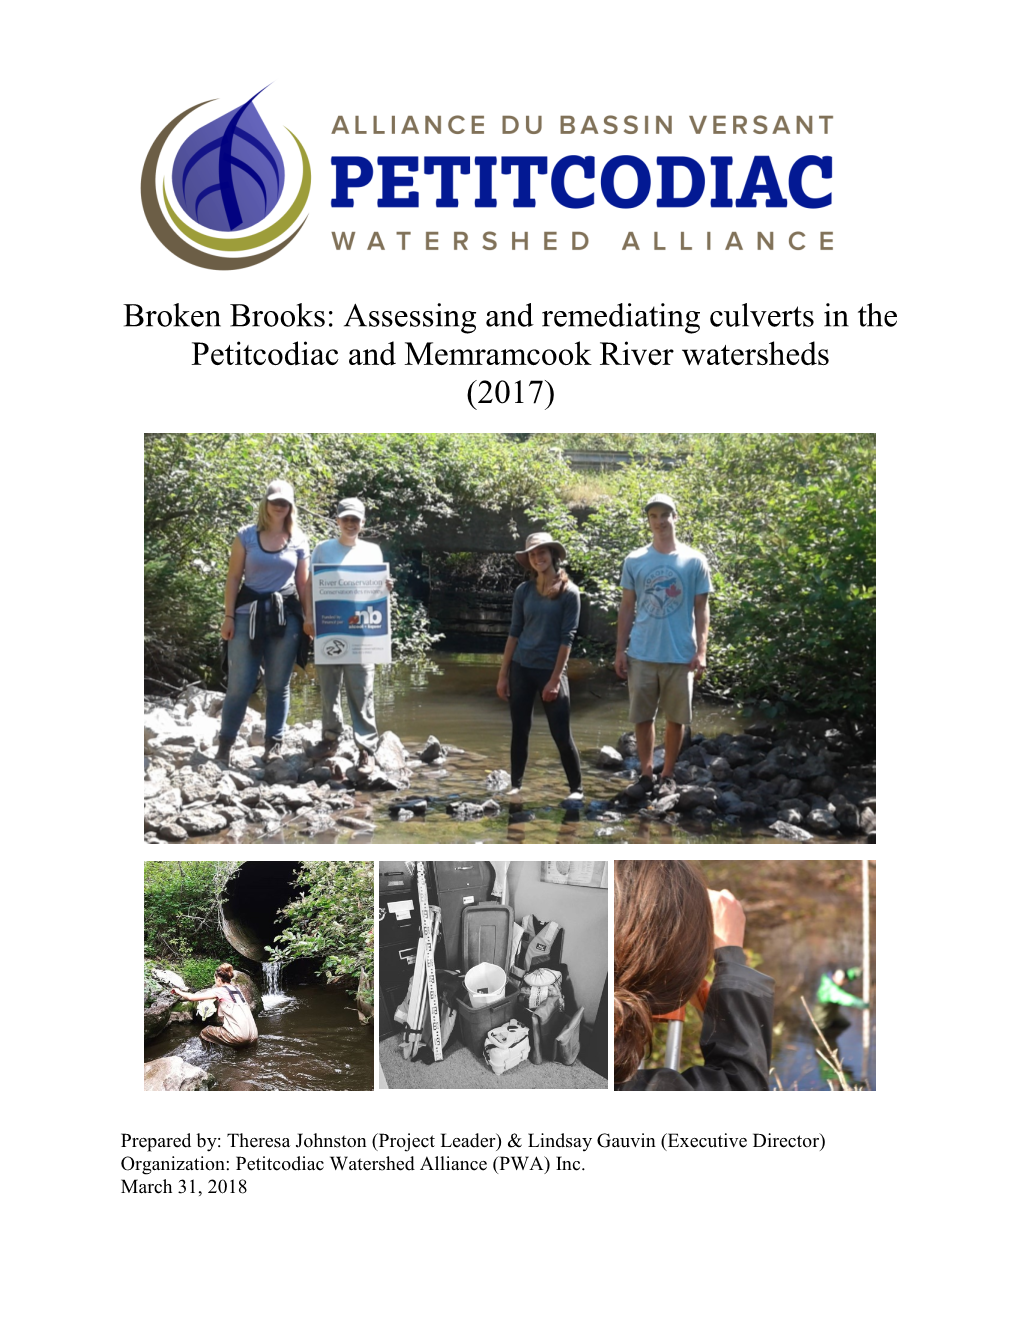 Broken Brooks: Assessing and Remediating Culverts in the Petitcodiac and Memramcook River Watersheds (2017)